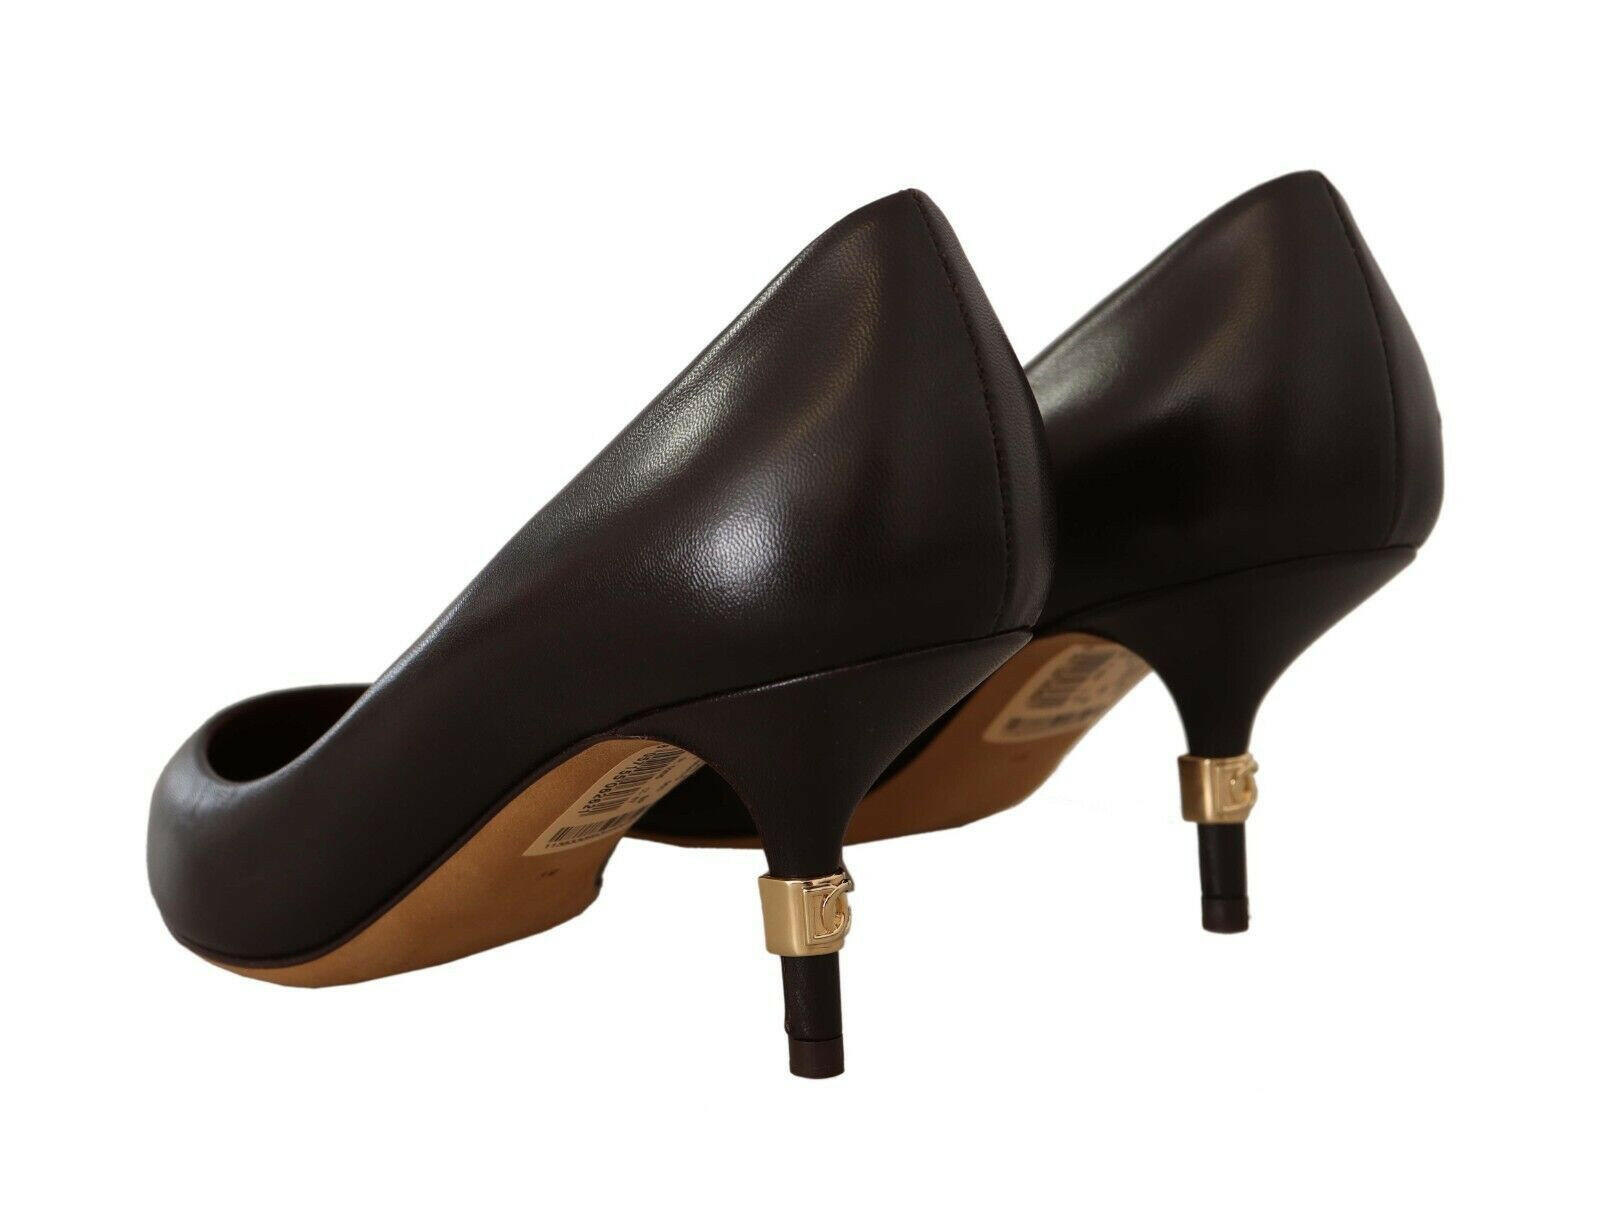 Dolce & Gabbana Brown Leather Kitten Mid Heels Pumps Shoes - GENUINE AUTHENTIC BRAND LLC  